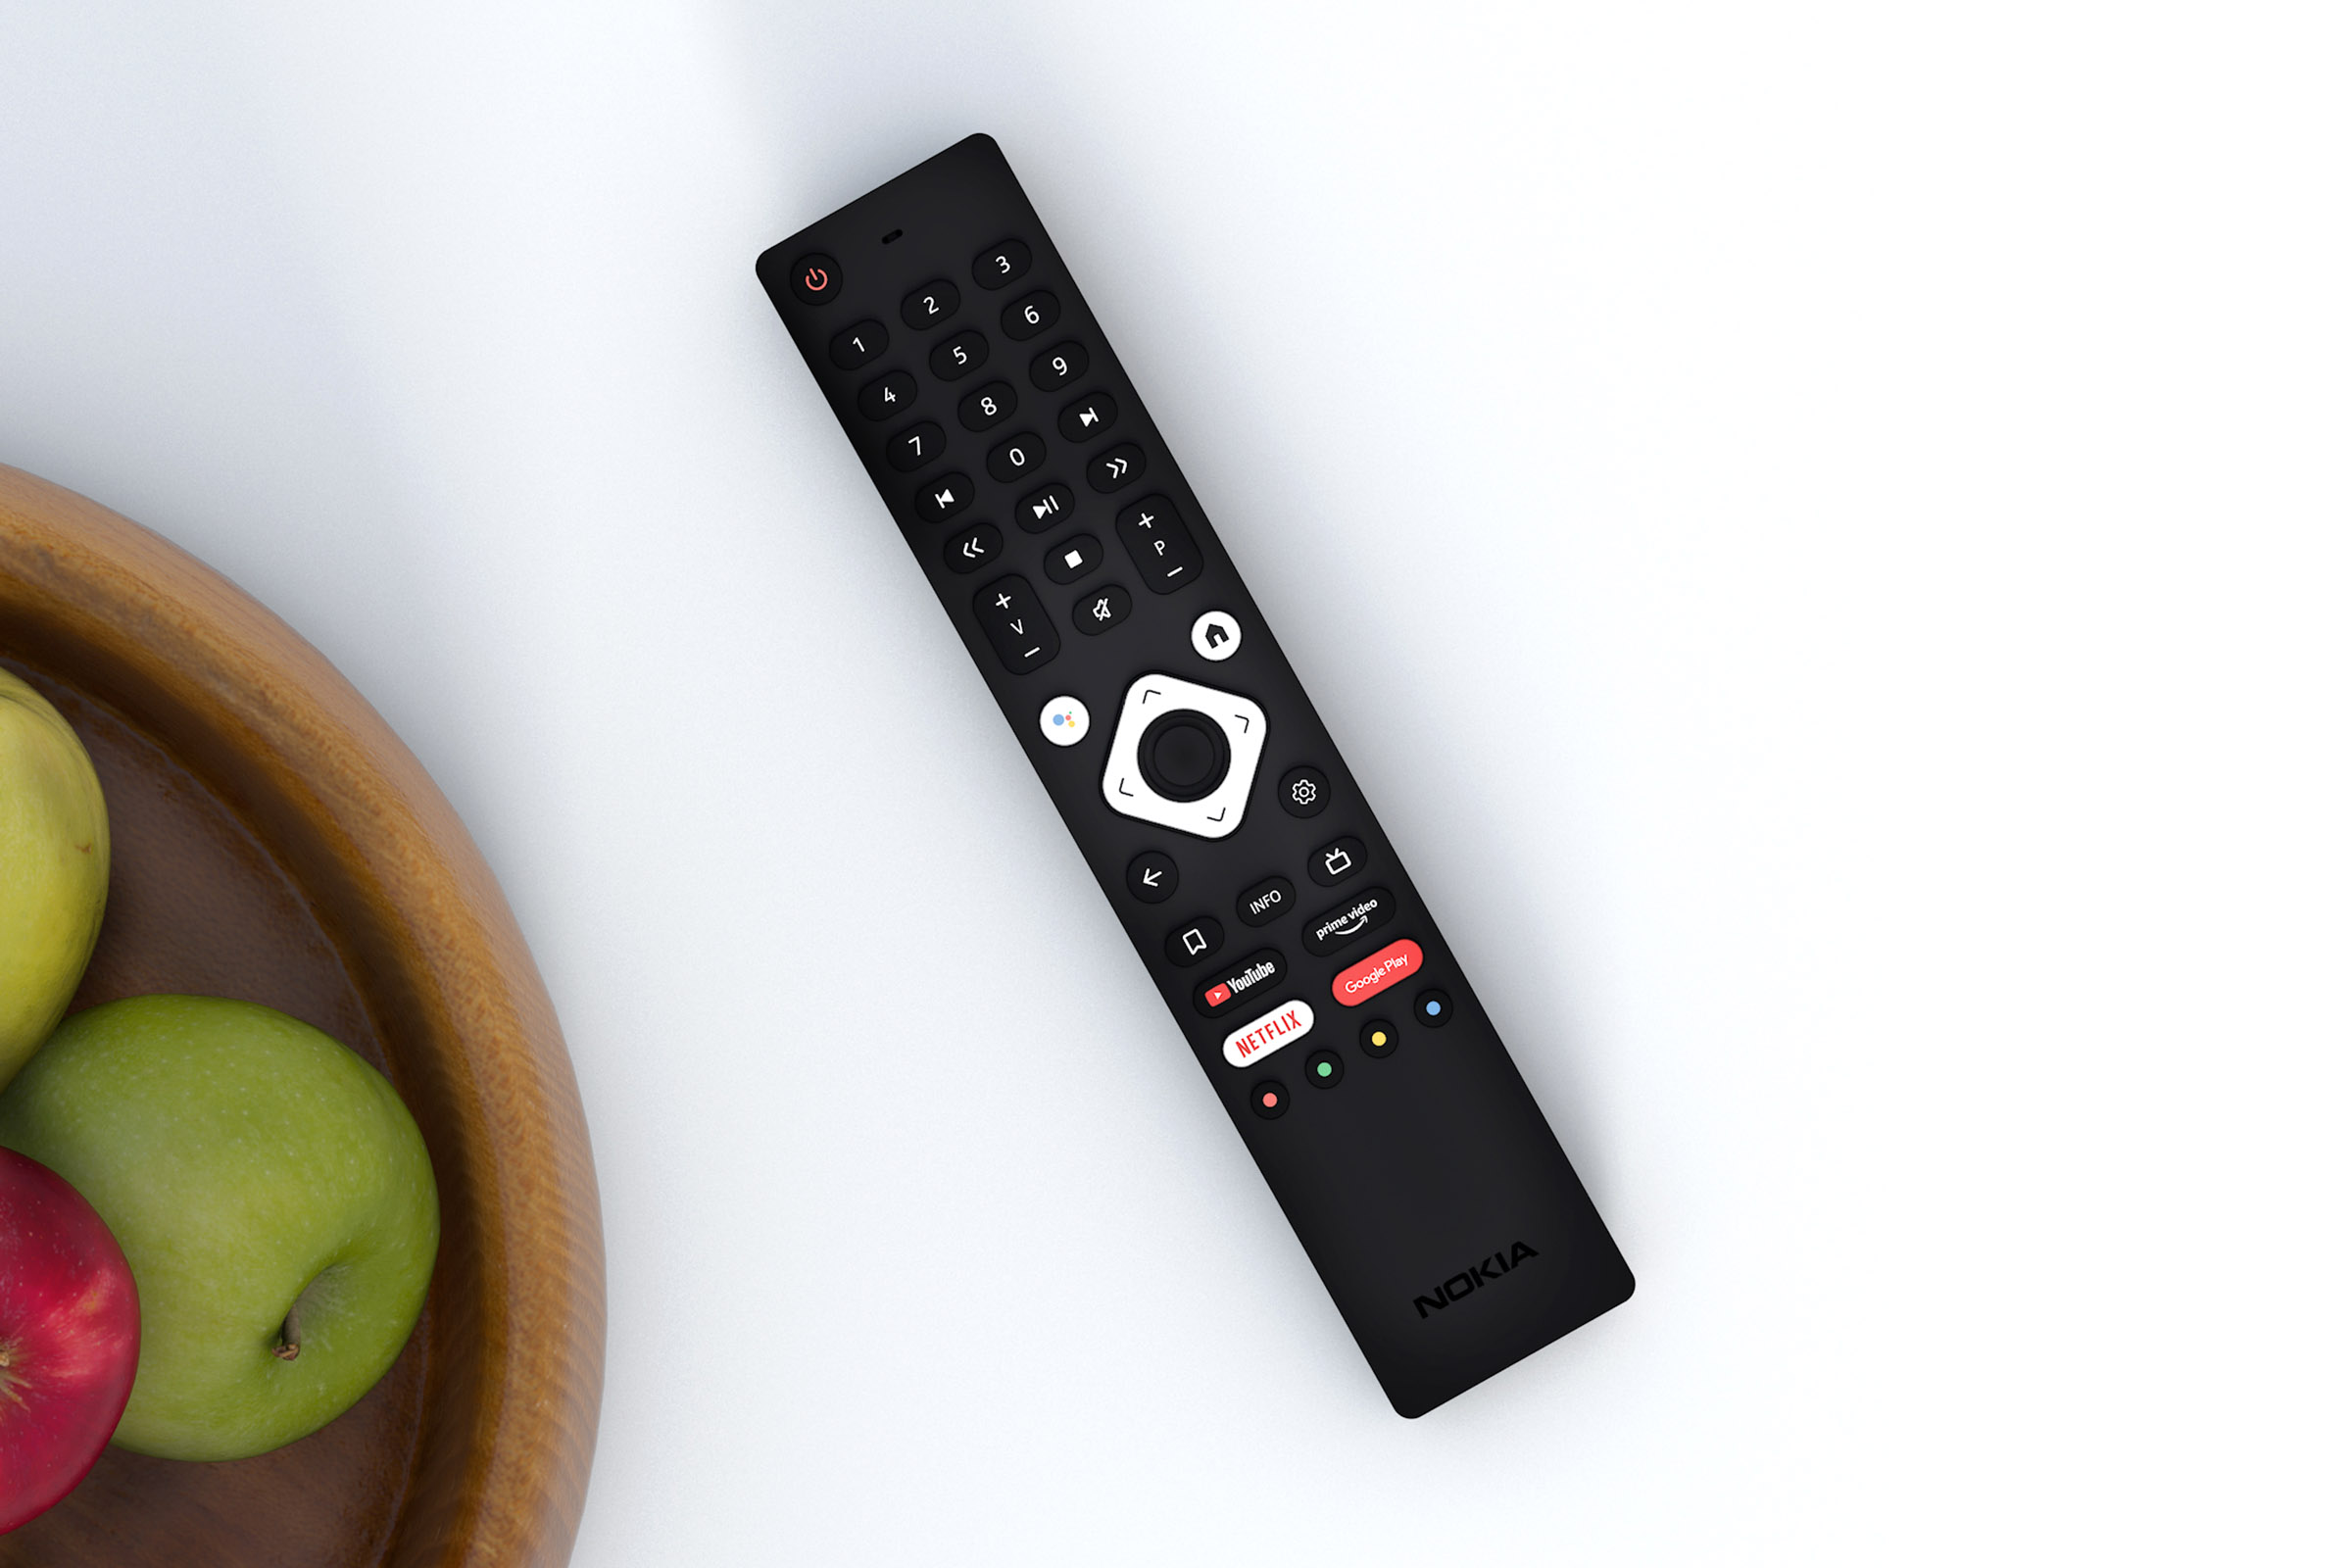 Nokia remote control for Streaming Box 8000